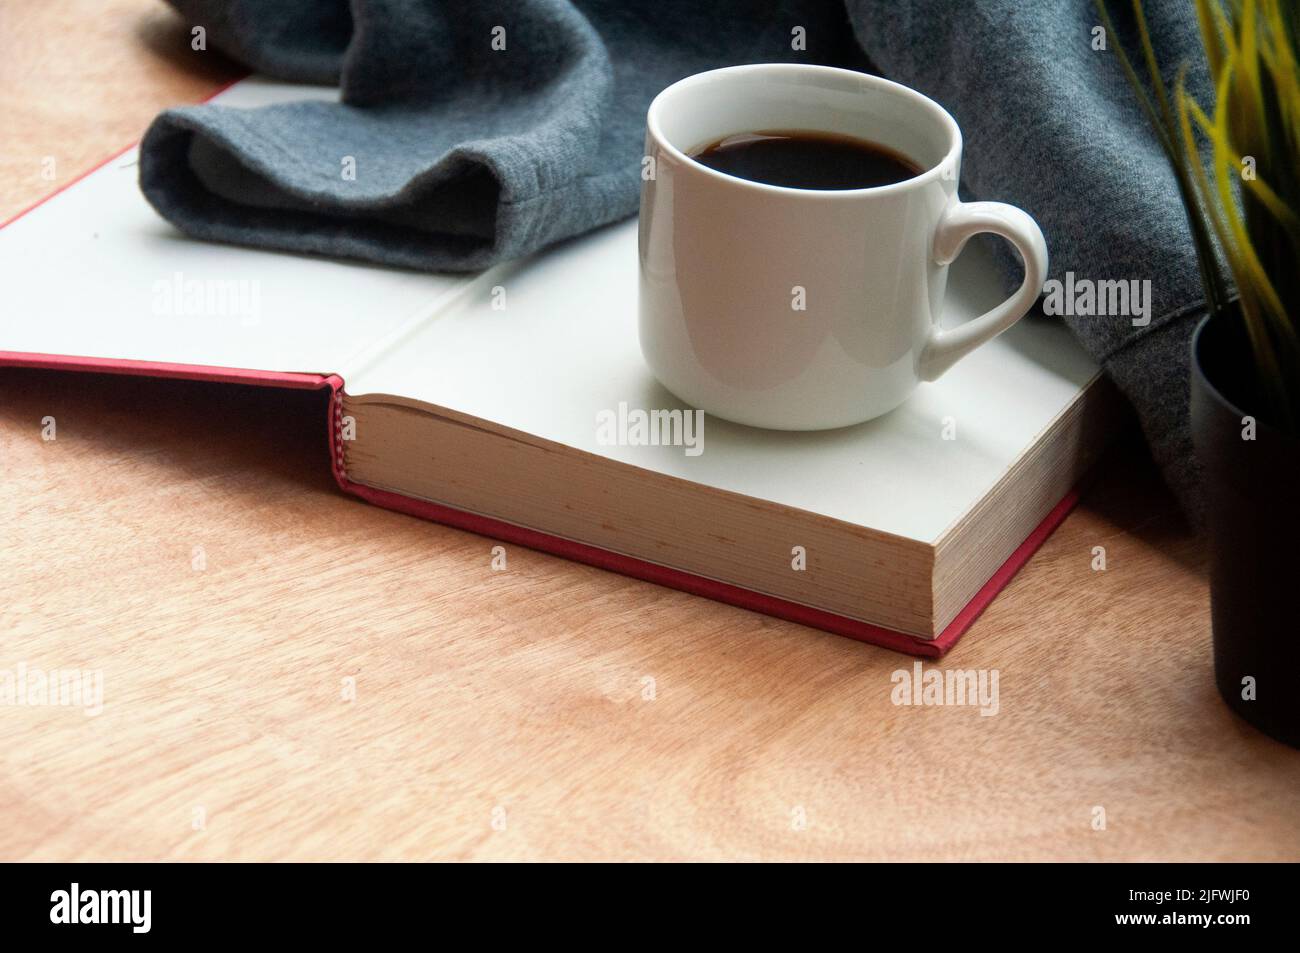 Coffee cup on top of a book with grey jacket on wooden desk background. Directly view. Copy space. Stock Photo